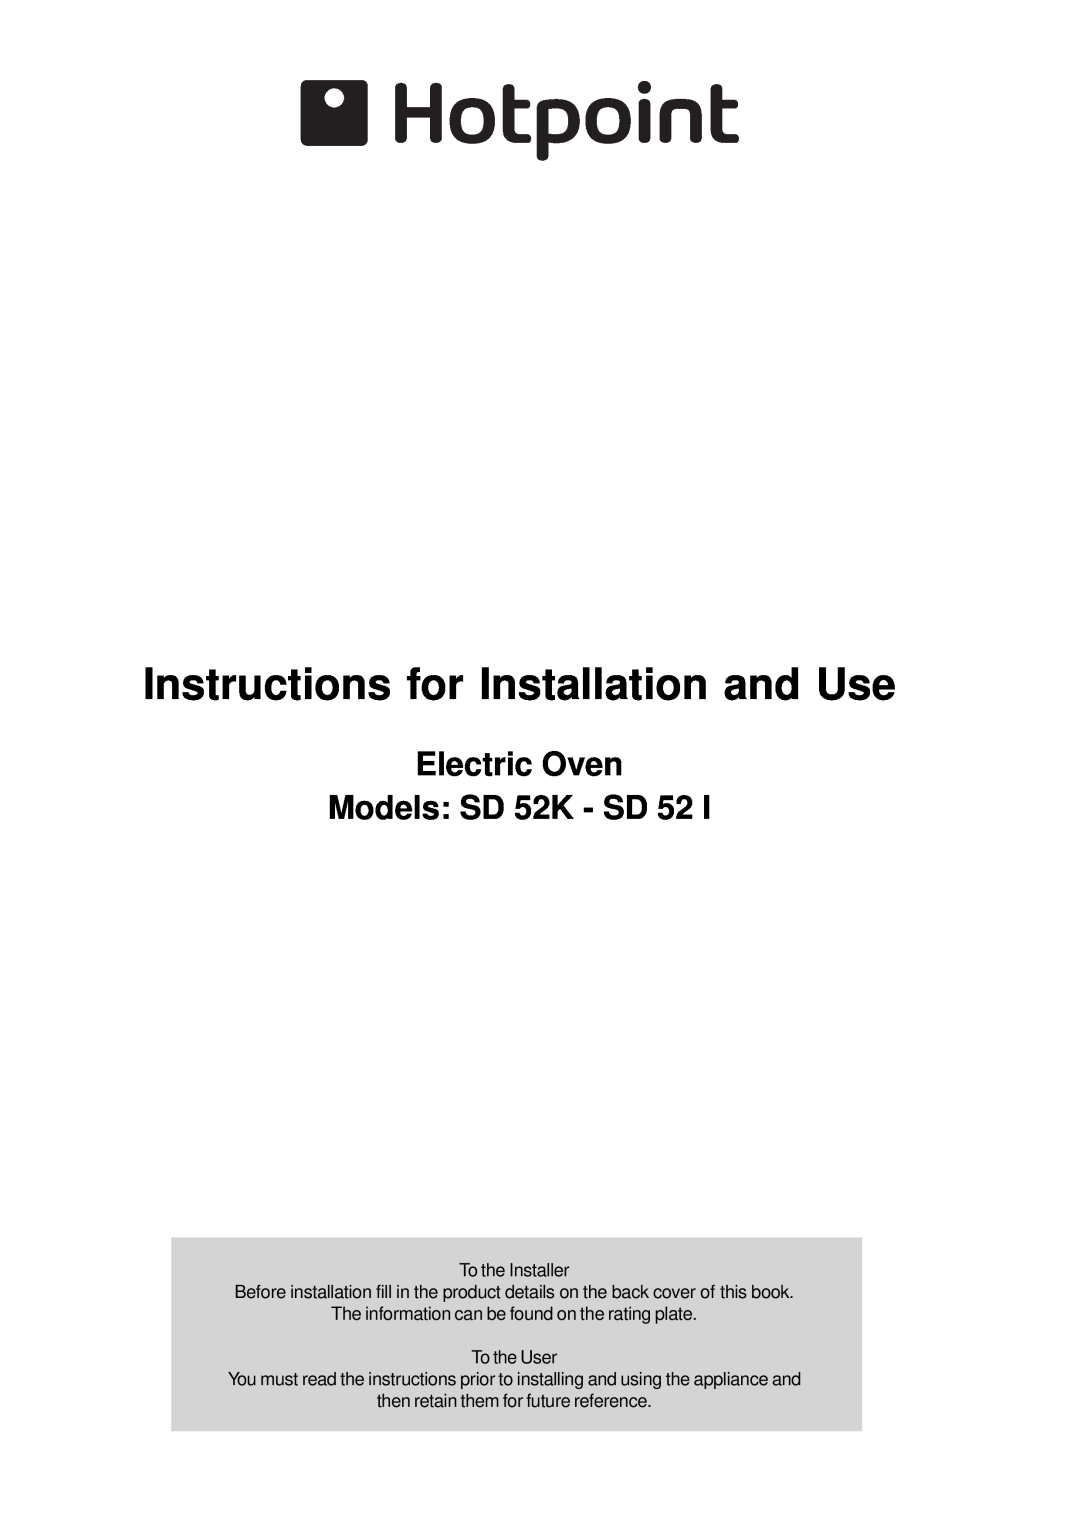 Hotpoint manual Electric Oven Models: SD 52K - SD 52, Instructions for Installation and Use 